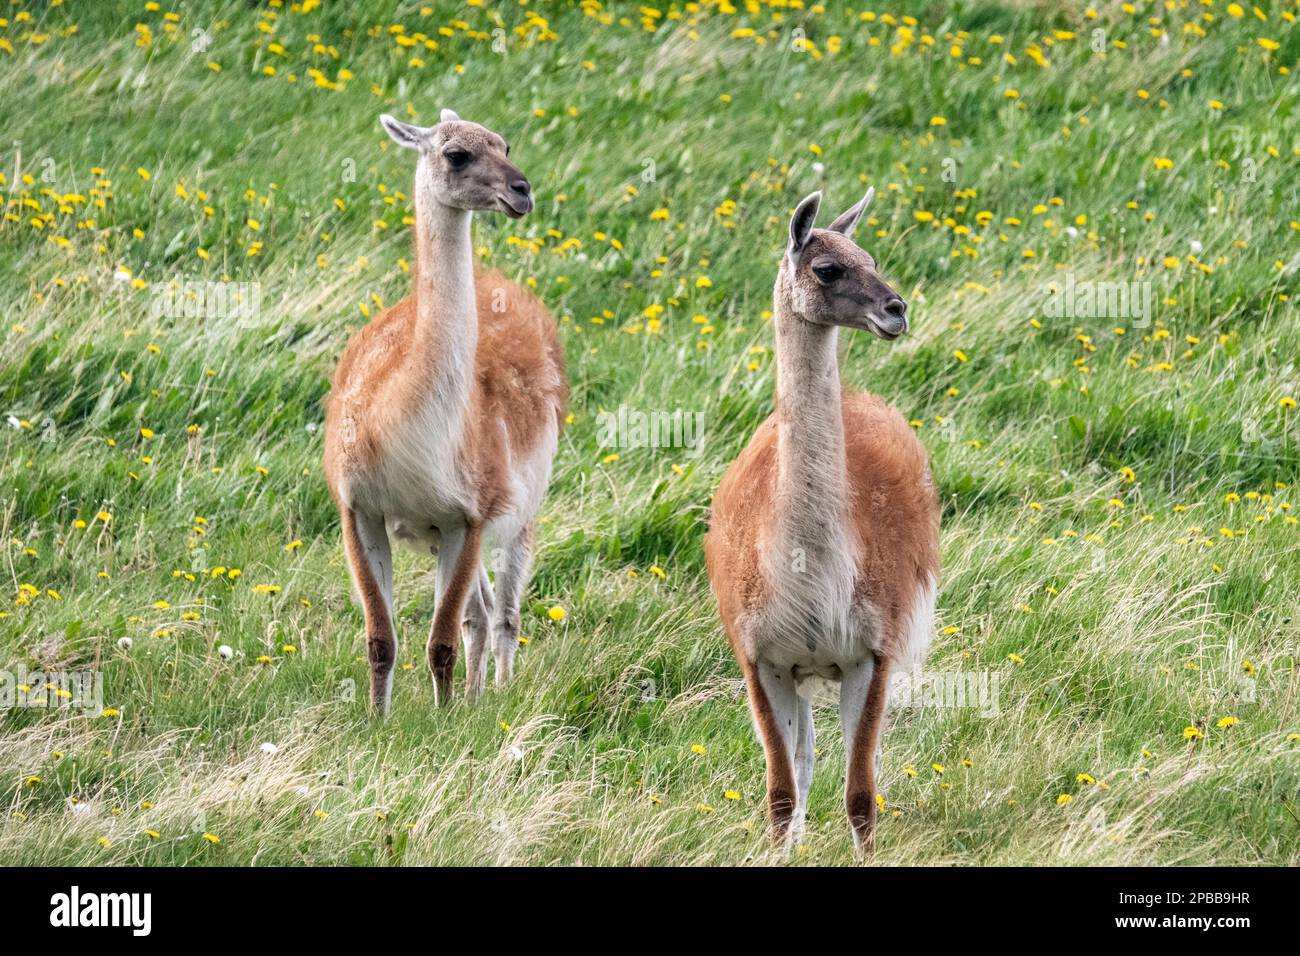 Windblown quanacos in a field of dandelions, Chacabuca Valley, Patagonia Stock Photo